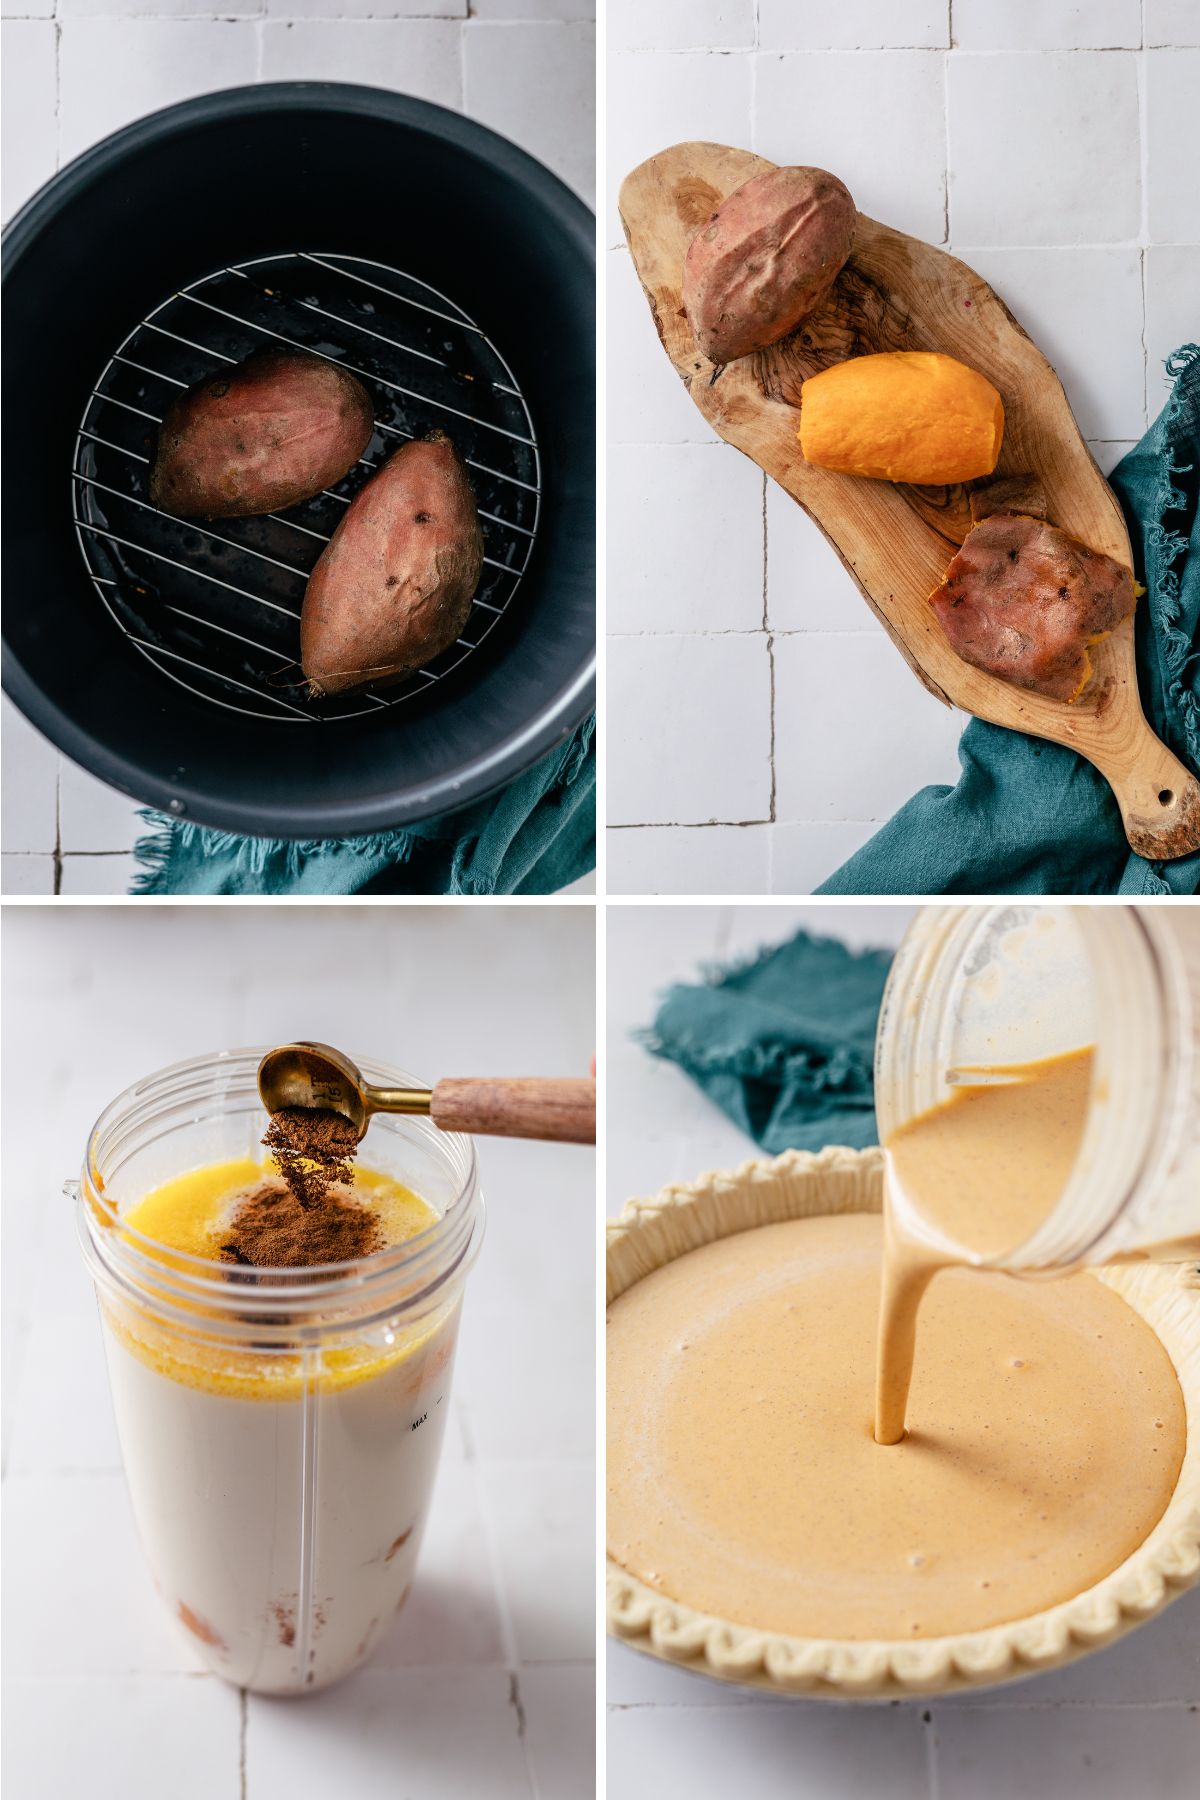 step-by-step instructions for how to make Sweet Potato Pie with Condensed Milk